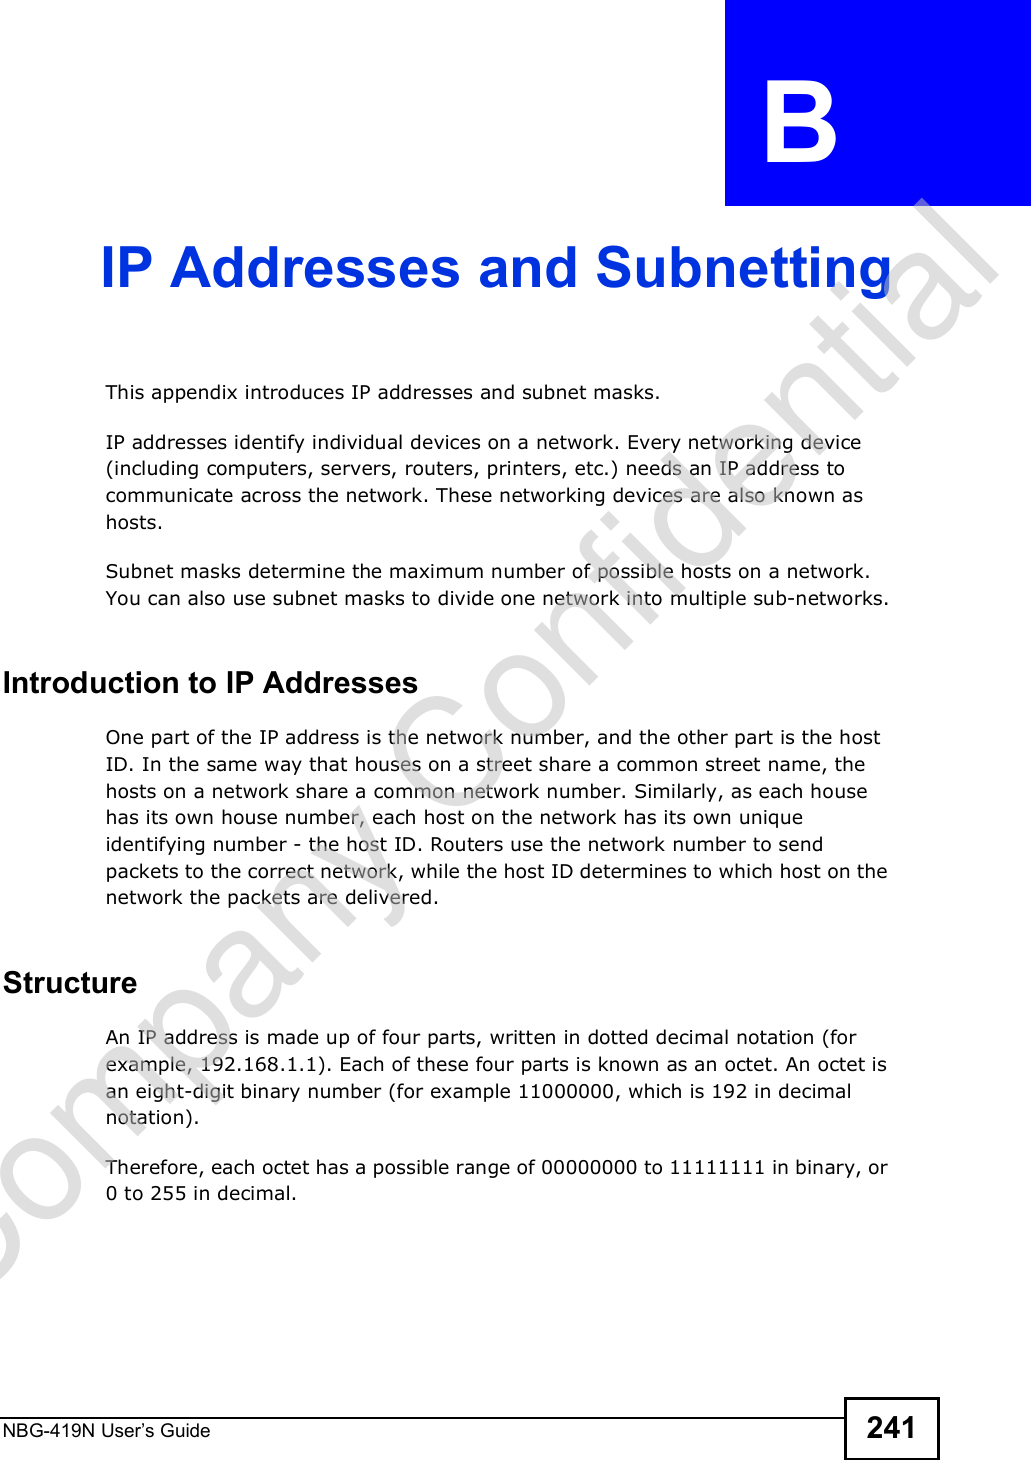 NBG-419N User s Guide 241APPENDIX  B IP Addresses and SubnettingThis appendix introduces IP addresses and subnet masks. IP addresses identify individual devices on a network. Every networking device (including computers, servers, routers, printers, etc.) needs an IP address to communicate across the network. These networking devices are also known as hosts.Subnet masks determine the maximum number of possible hosts on a network. You can also use subnet masks to divide one network into multiple sub-networks.Introduction to IP AddressesOne part of the IP address is the network number, and the other part is the host ID. In the same way that houses on a street share a common street name, the hosts on a network share a common network number. Similarly, as each house has its own house number, each host on the network has its own unique identifying number - the host ID. Routers use the network number to send packets to the correct network, while the host ID determines to which host on the network the packets are delivered.StructureAn IP address is made up of four parts, written in dotted decimal notation (for example, 192.168.1.1). Each of these four parts is known as an octet. An octet is an eight-digit binary number (for example 11000000, which is 192 in decimal notation). Therefore, each octet has a possible range of 00000000 to 11111111 in binary, or 0 to 255 in decimal.Company Confidential